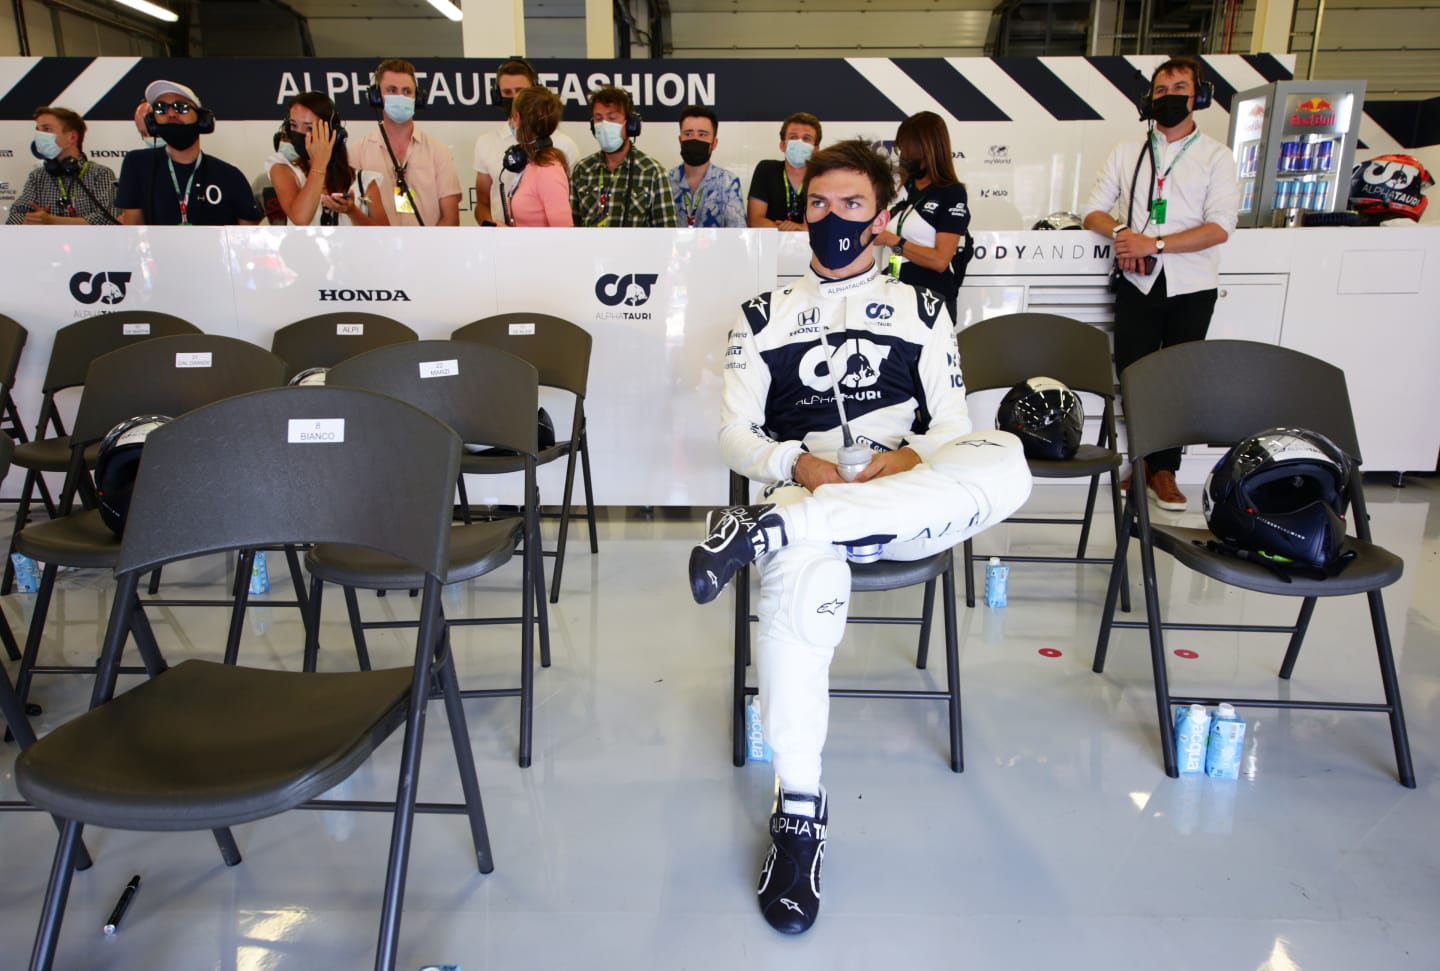 NORTHAMPTON, ENGLAND - JULY 18: Pierre Gasly of France and Scuderia AlphaTauri looks on in the garage during a red flag delay during the F1 Grand Prix of Great Britain at Silverstone on July 18, 2021 in Northampton, England. (Photo by Peter Fox/Getty Images)